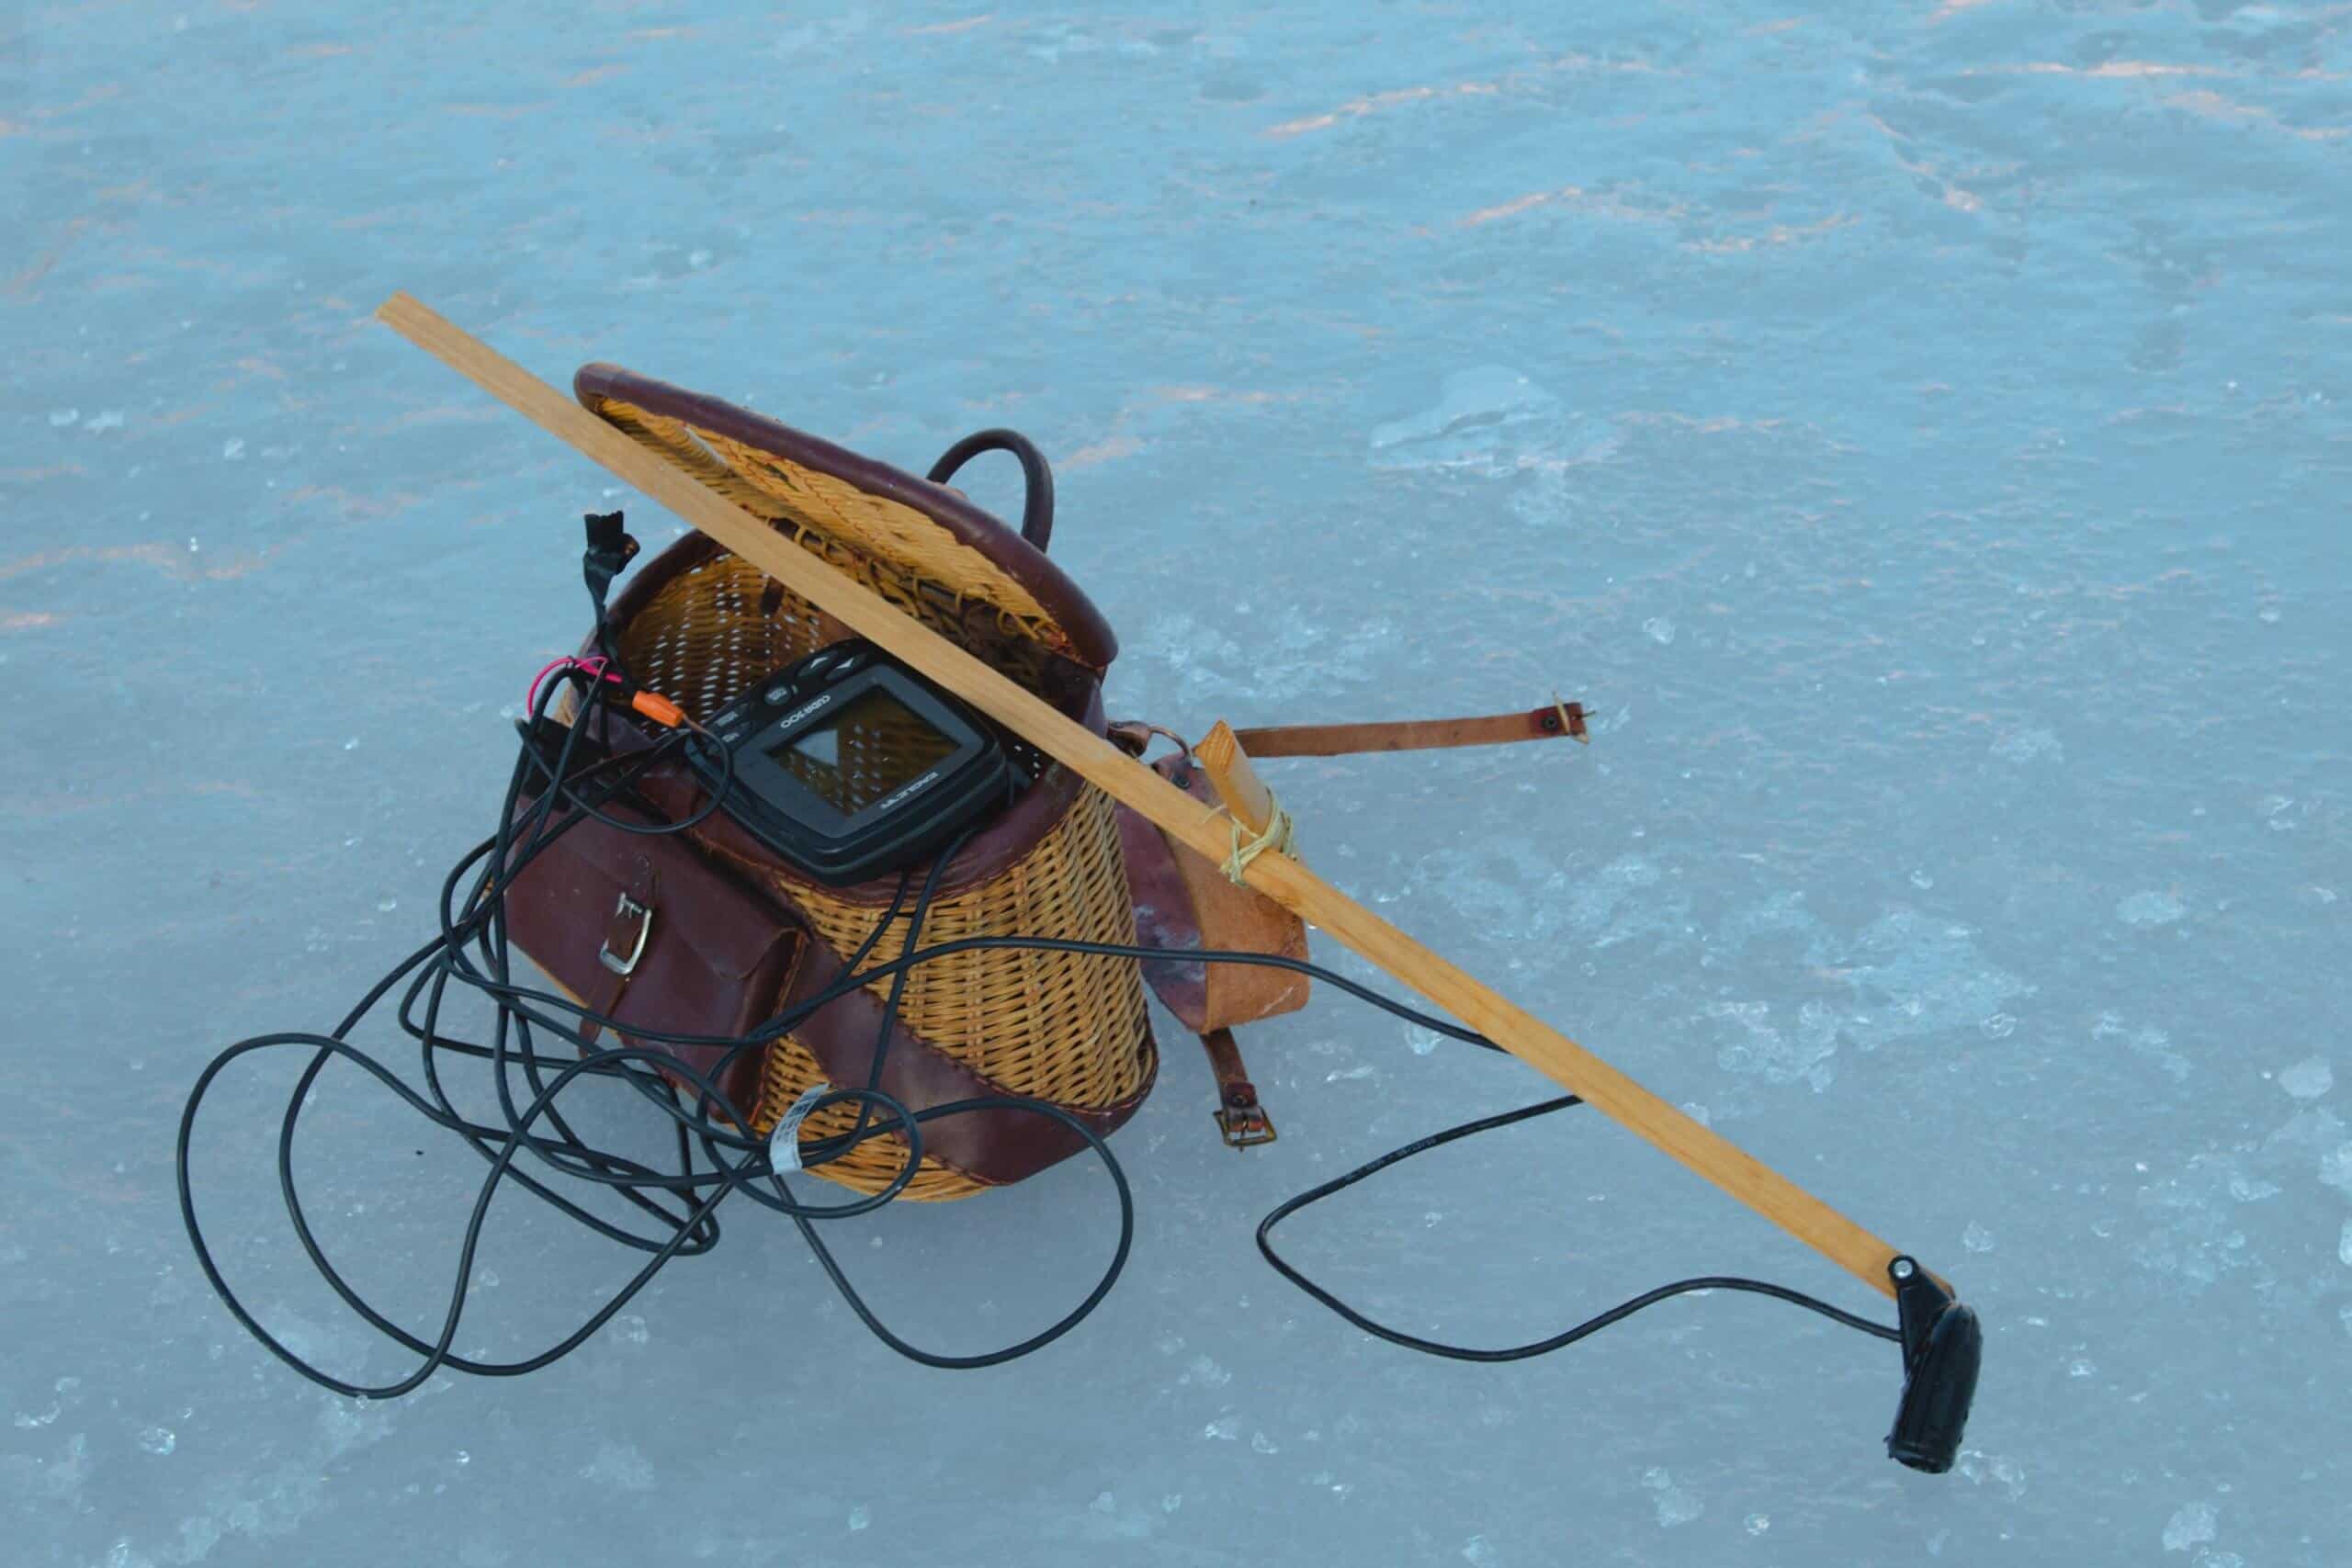 Brown bag on frozen lake with equipment and best ice fishing flasher